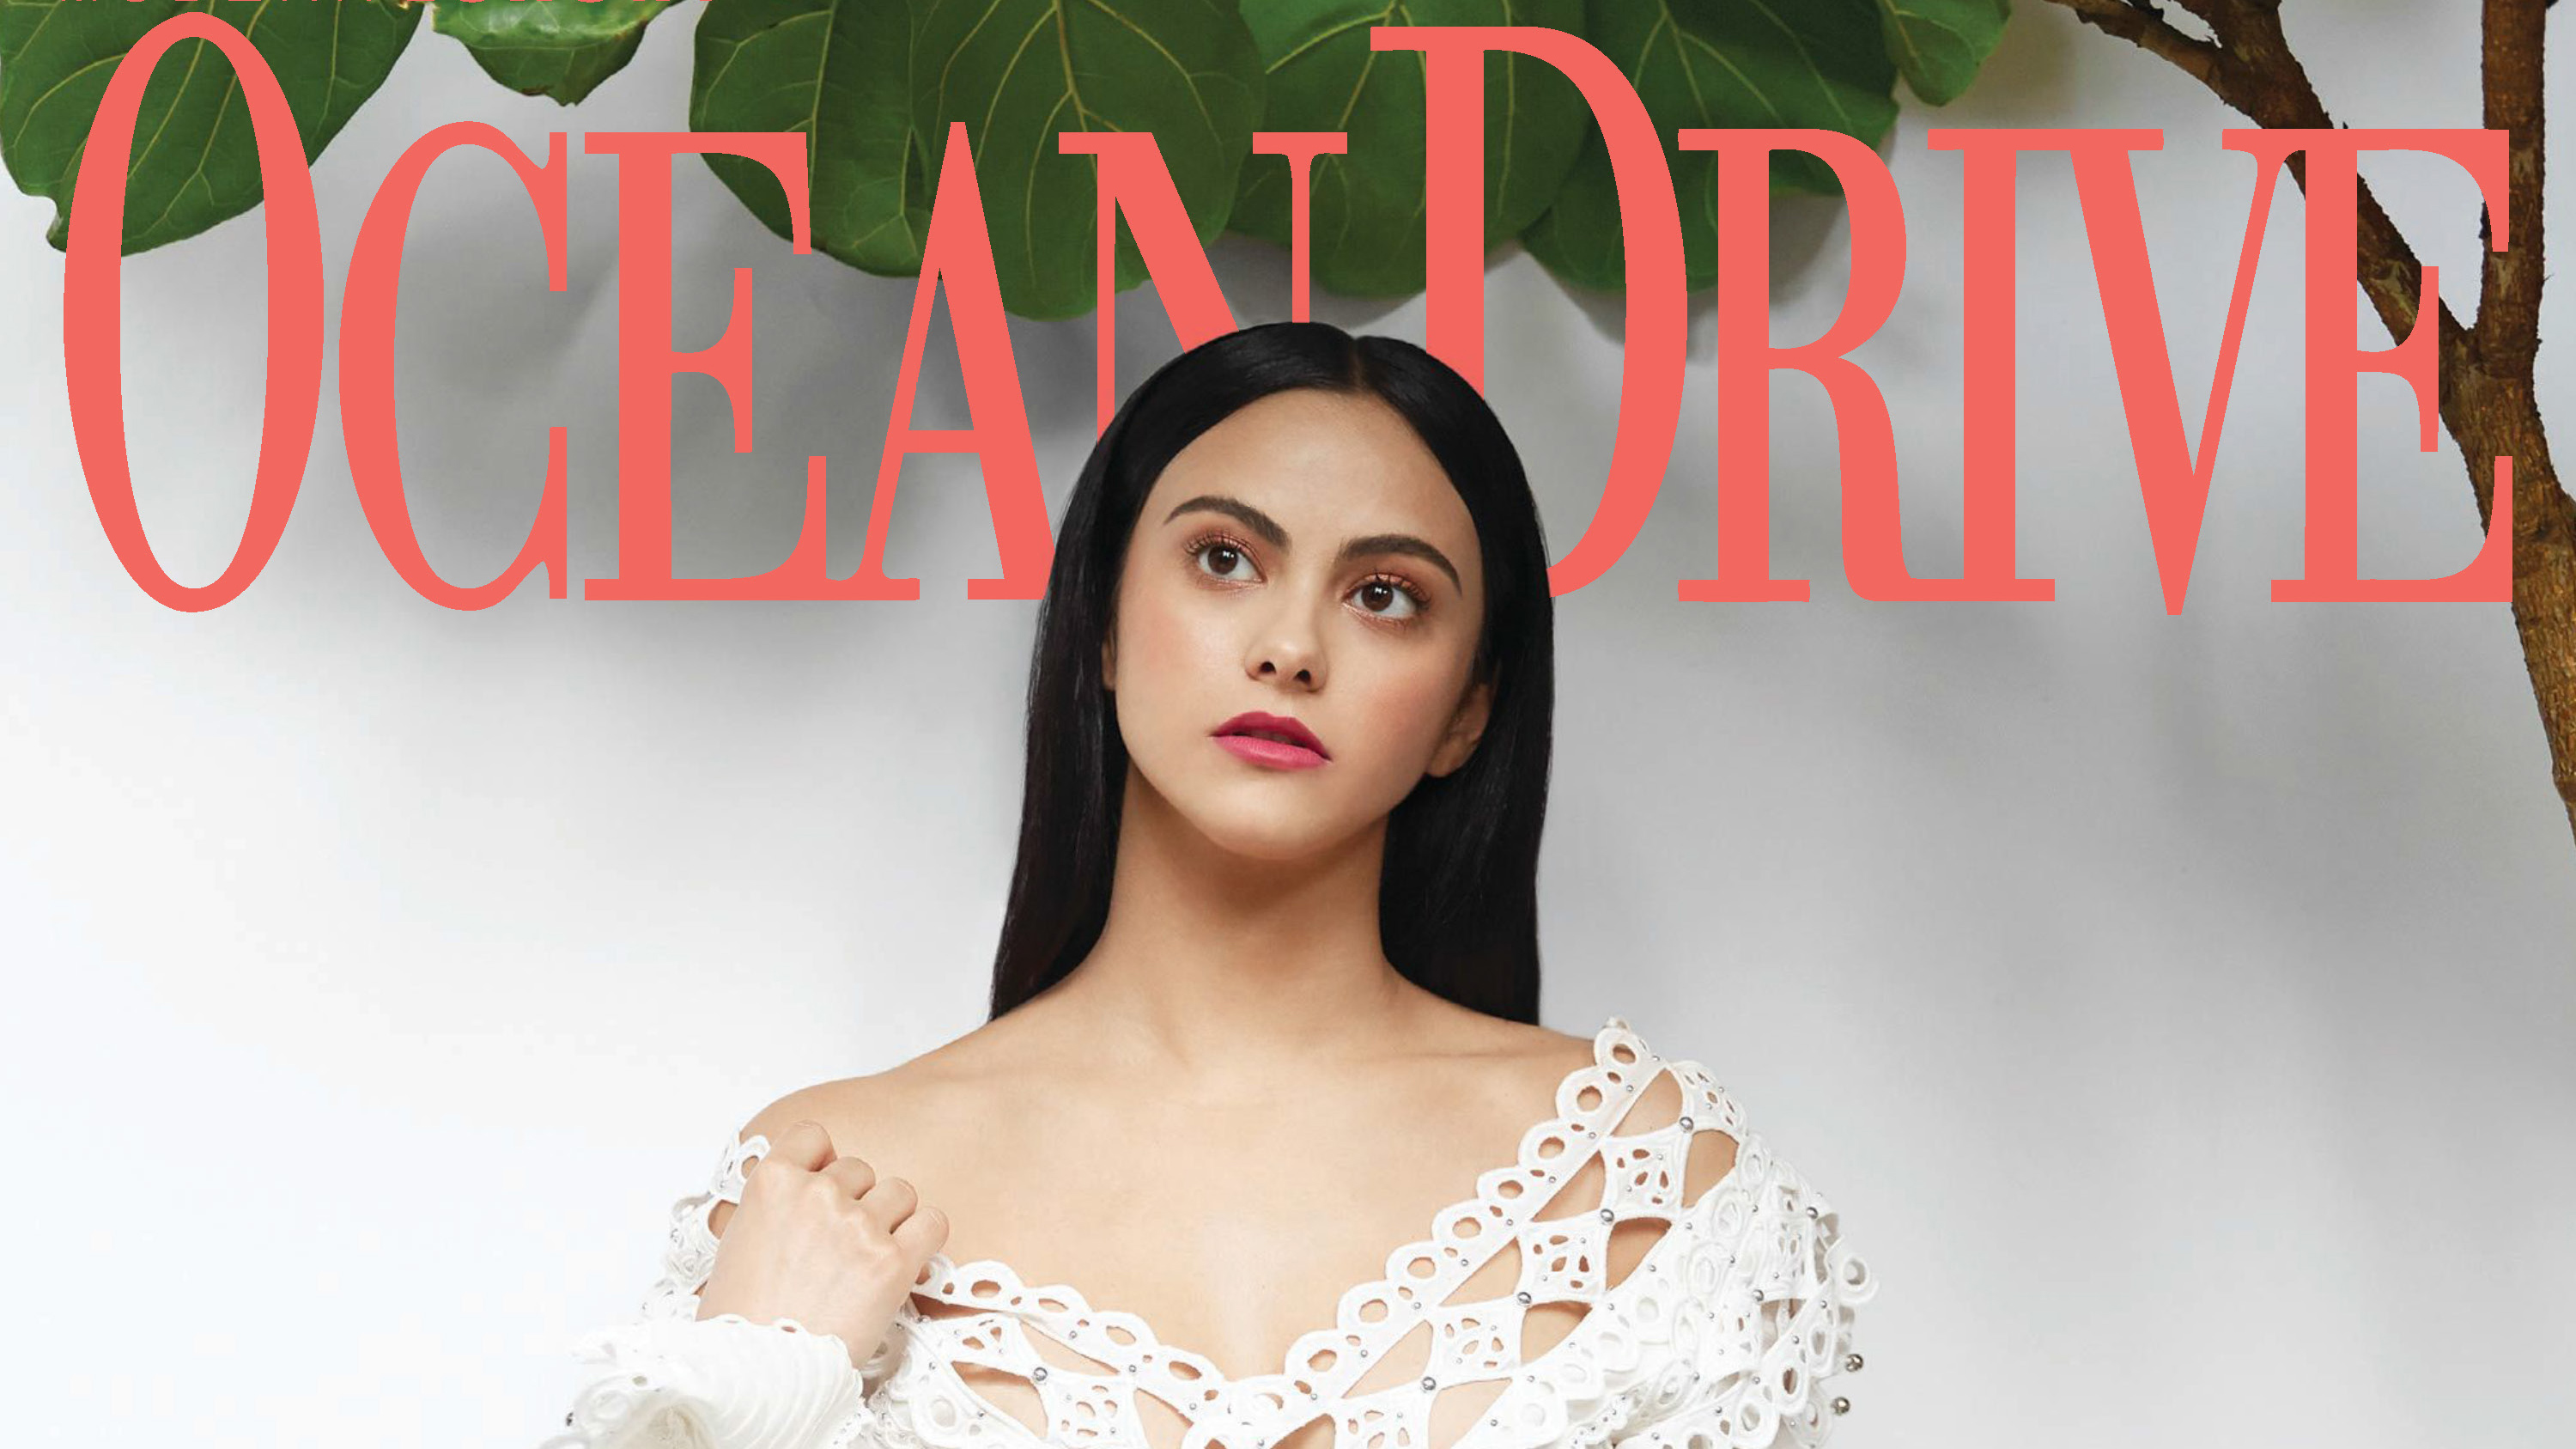 Camila Mendes 2019 Photoshoot Wallpapers